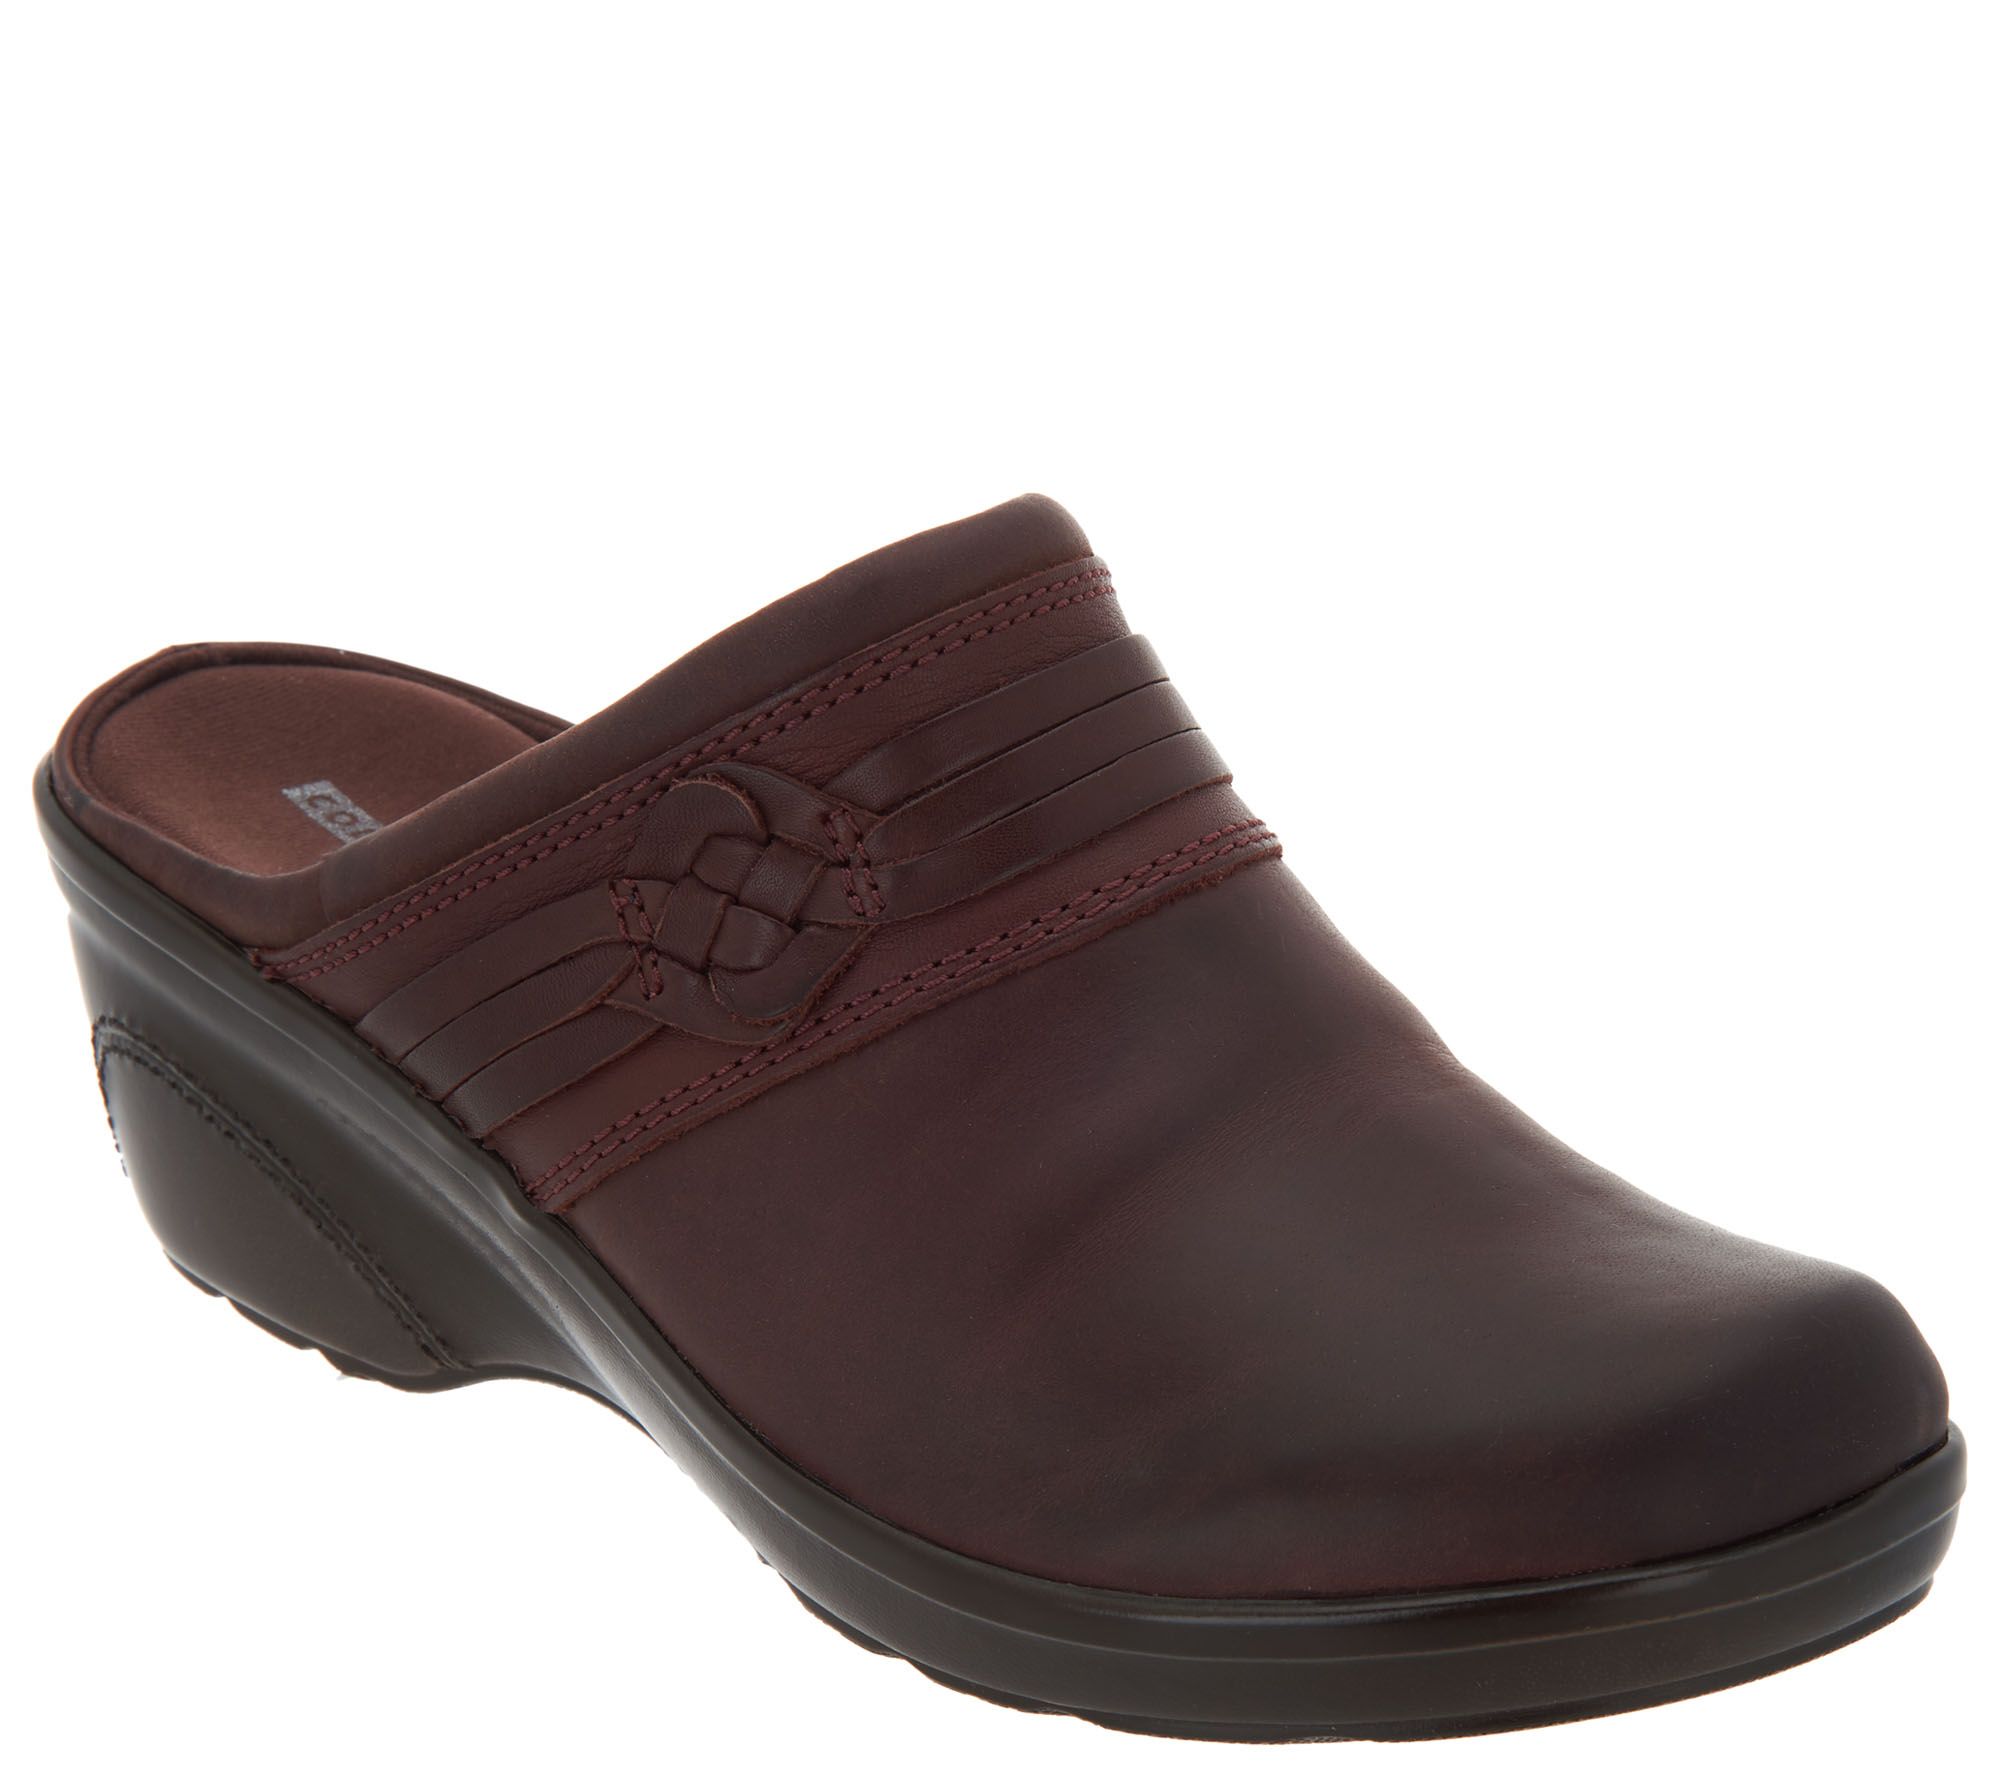 clarks woven leather clogs